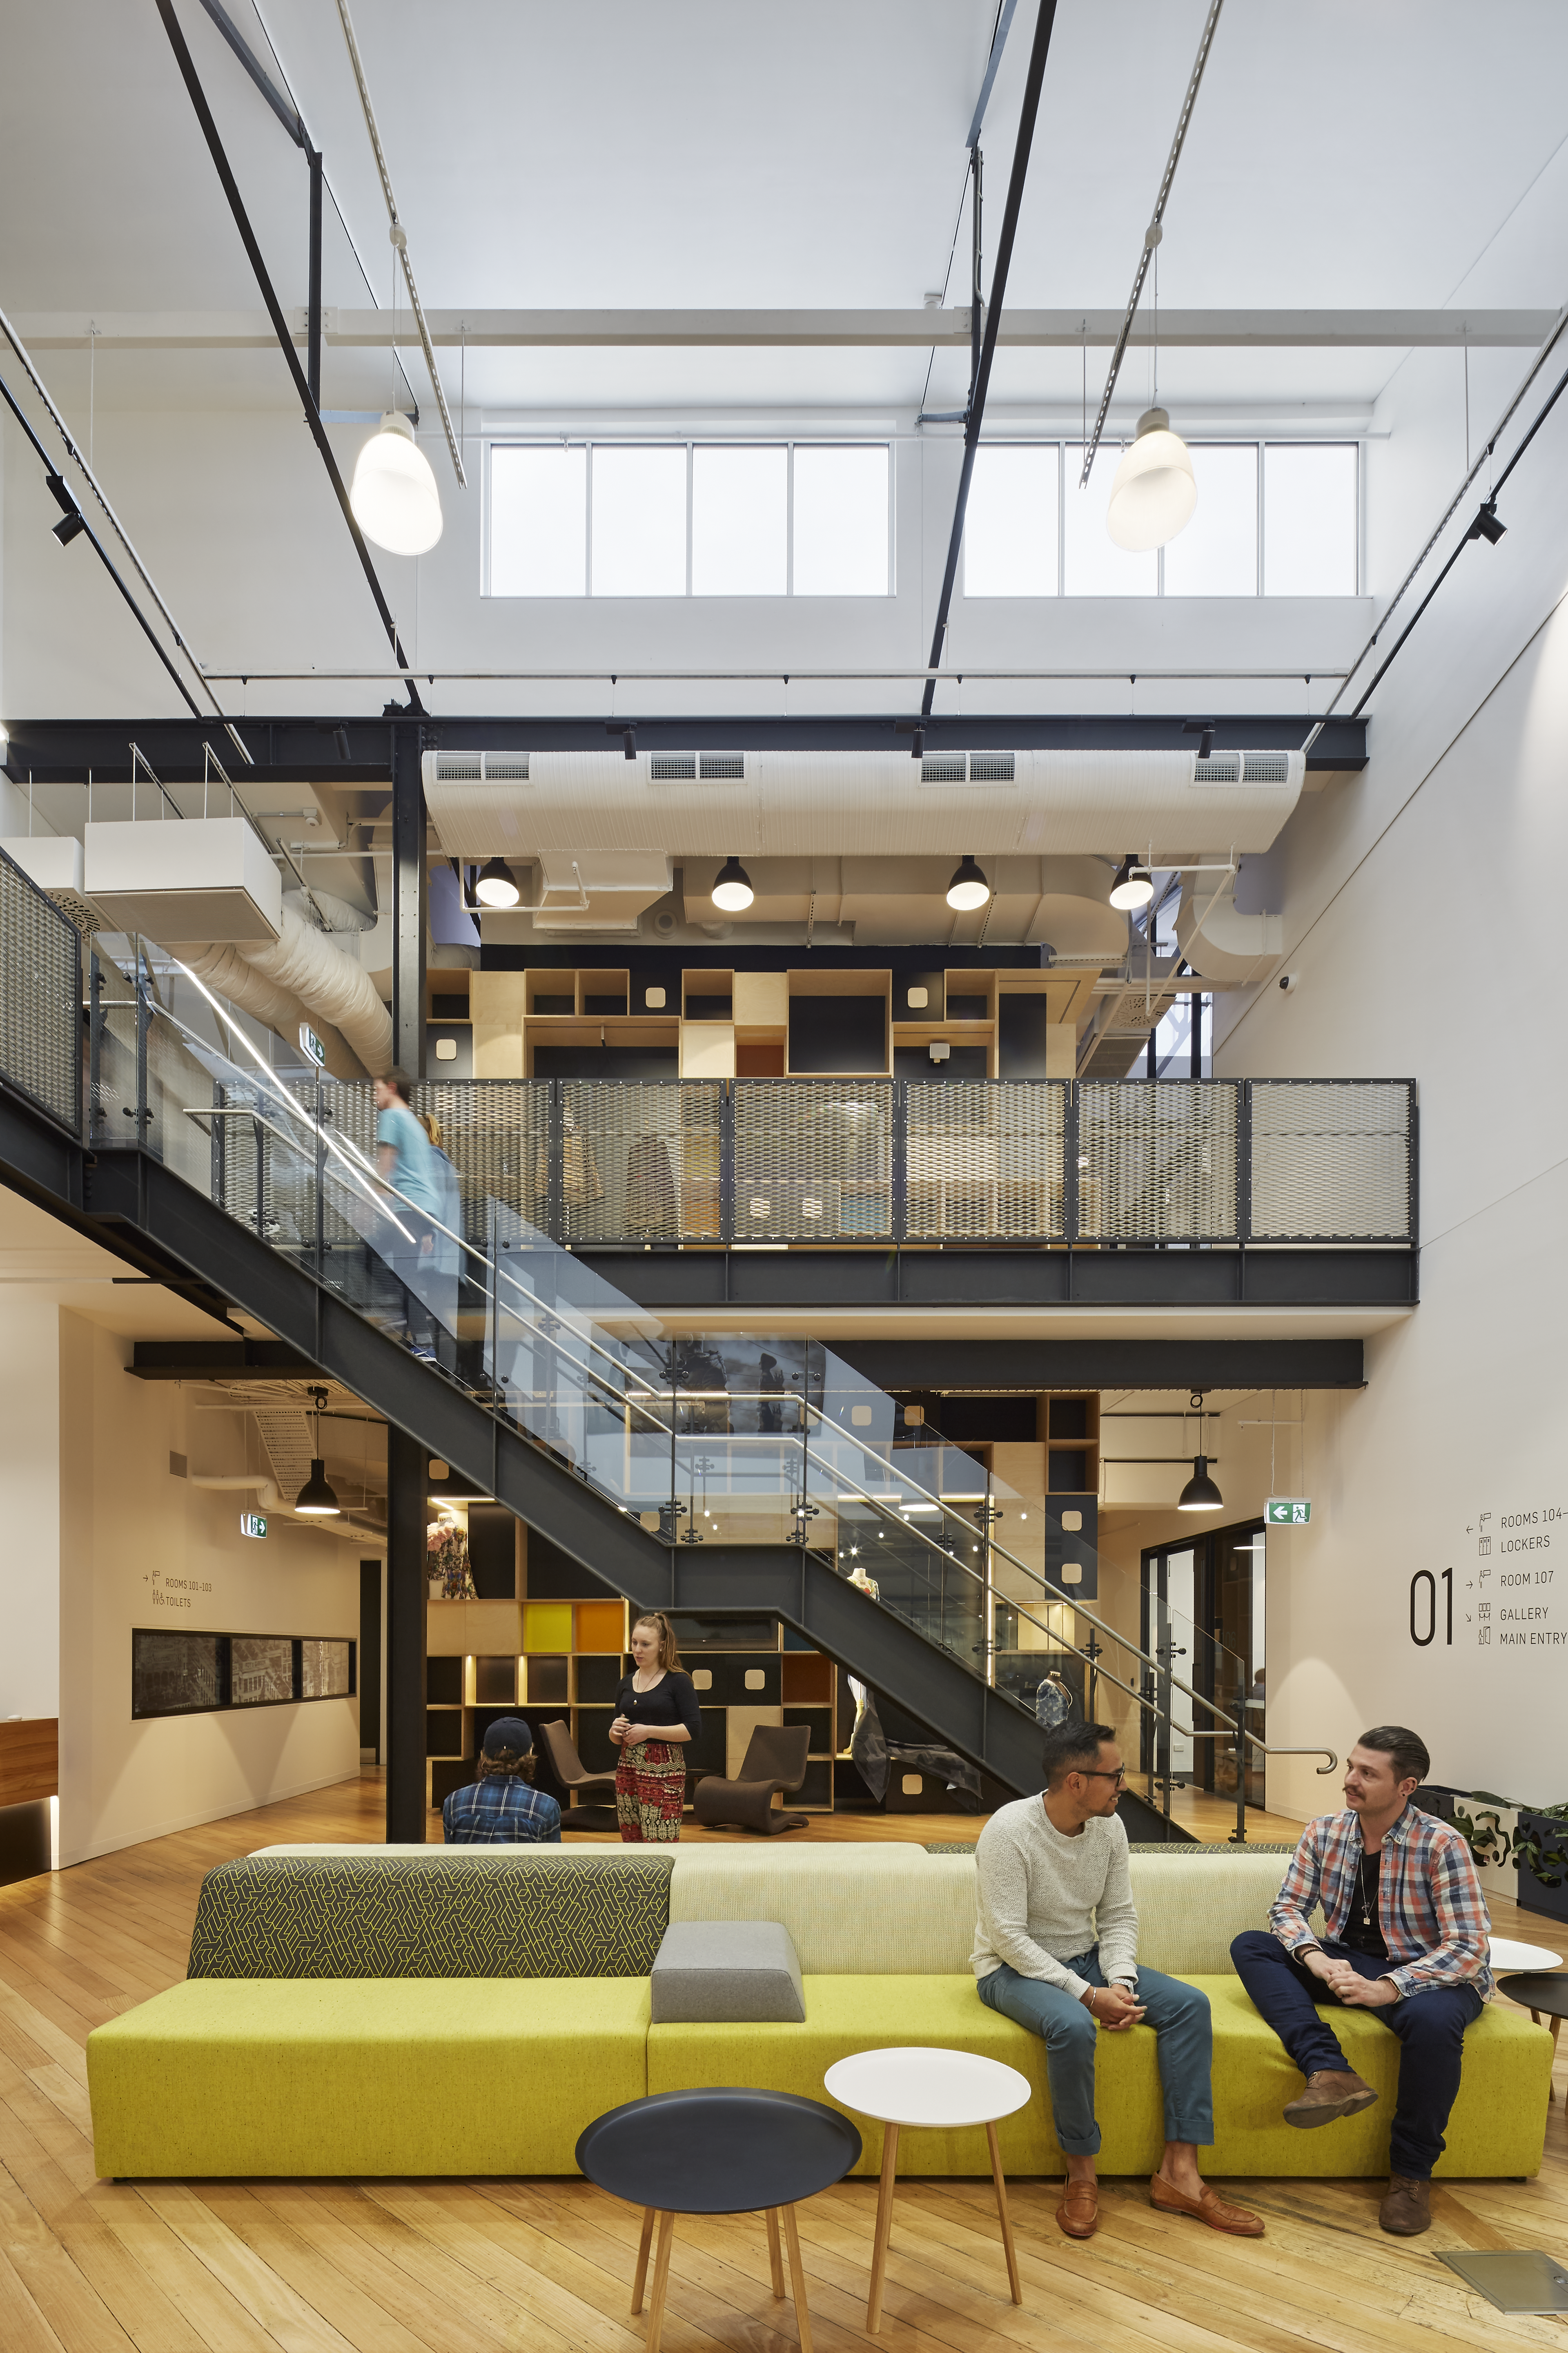 Colleagues converse in a spacious, well-lit open-plan office with stairs connecting multiple levels.